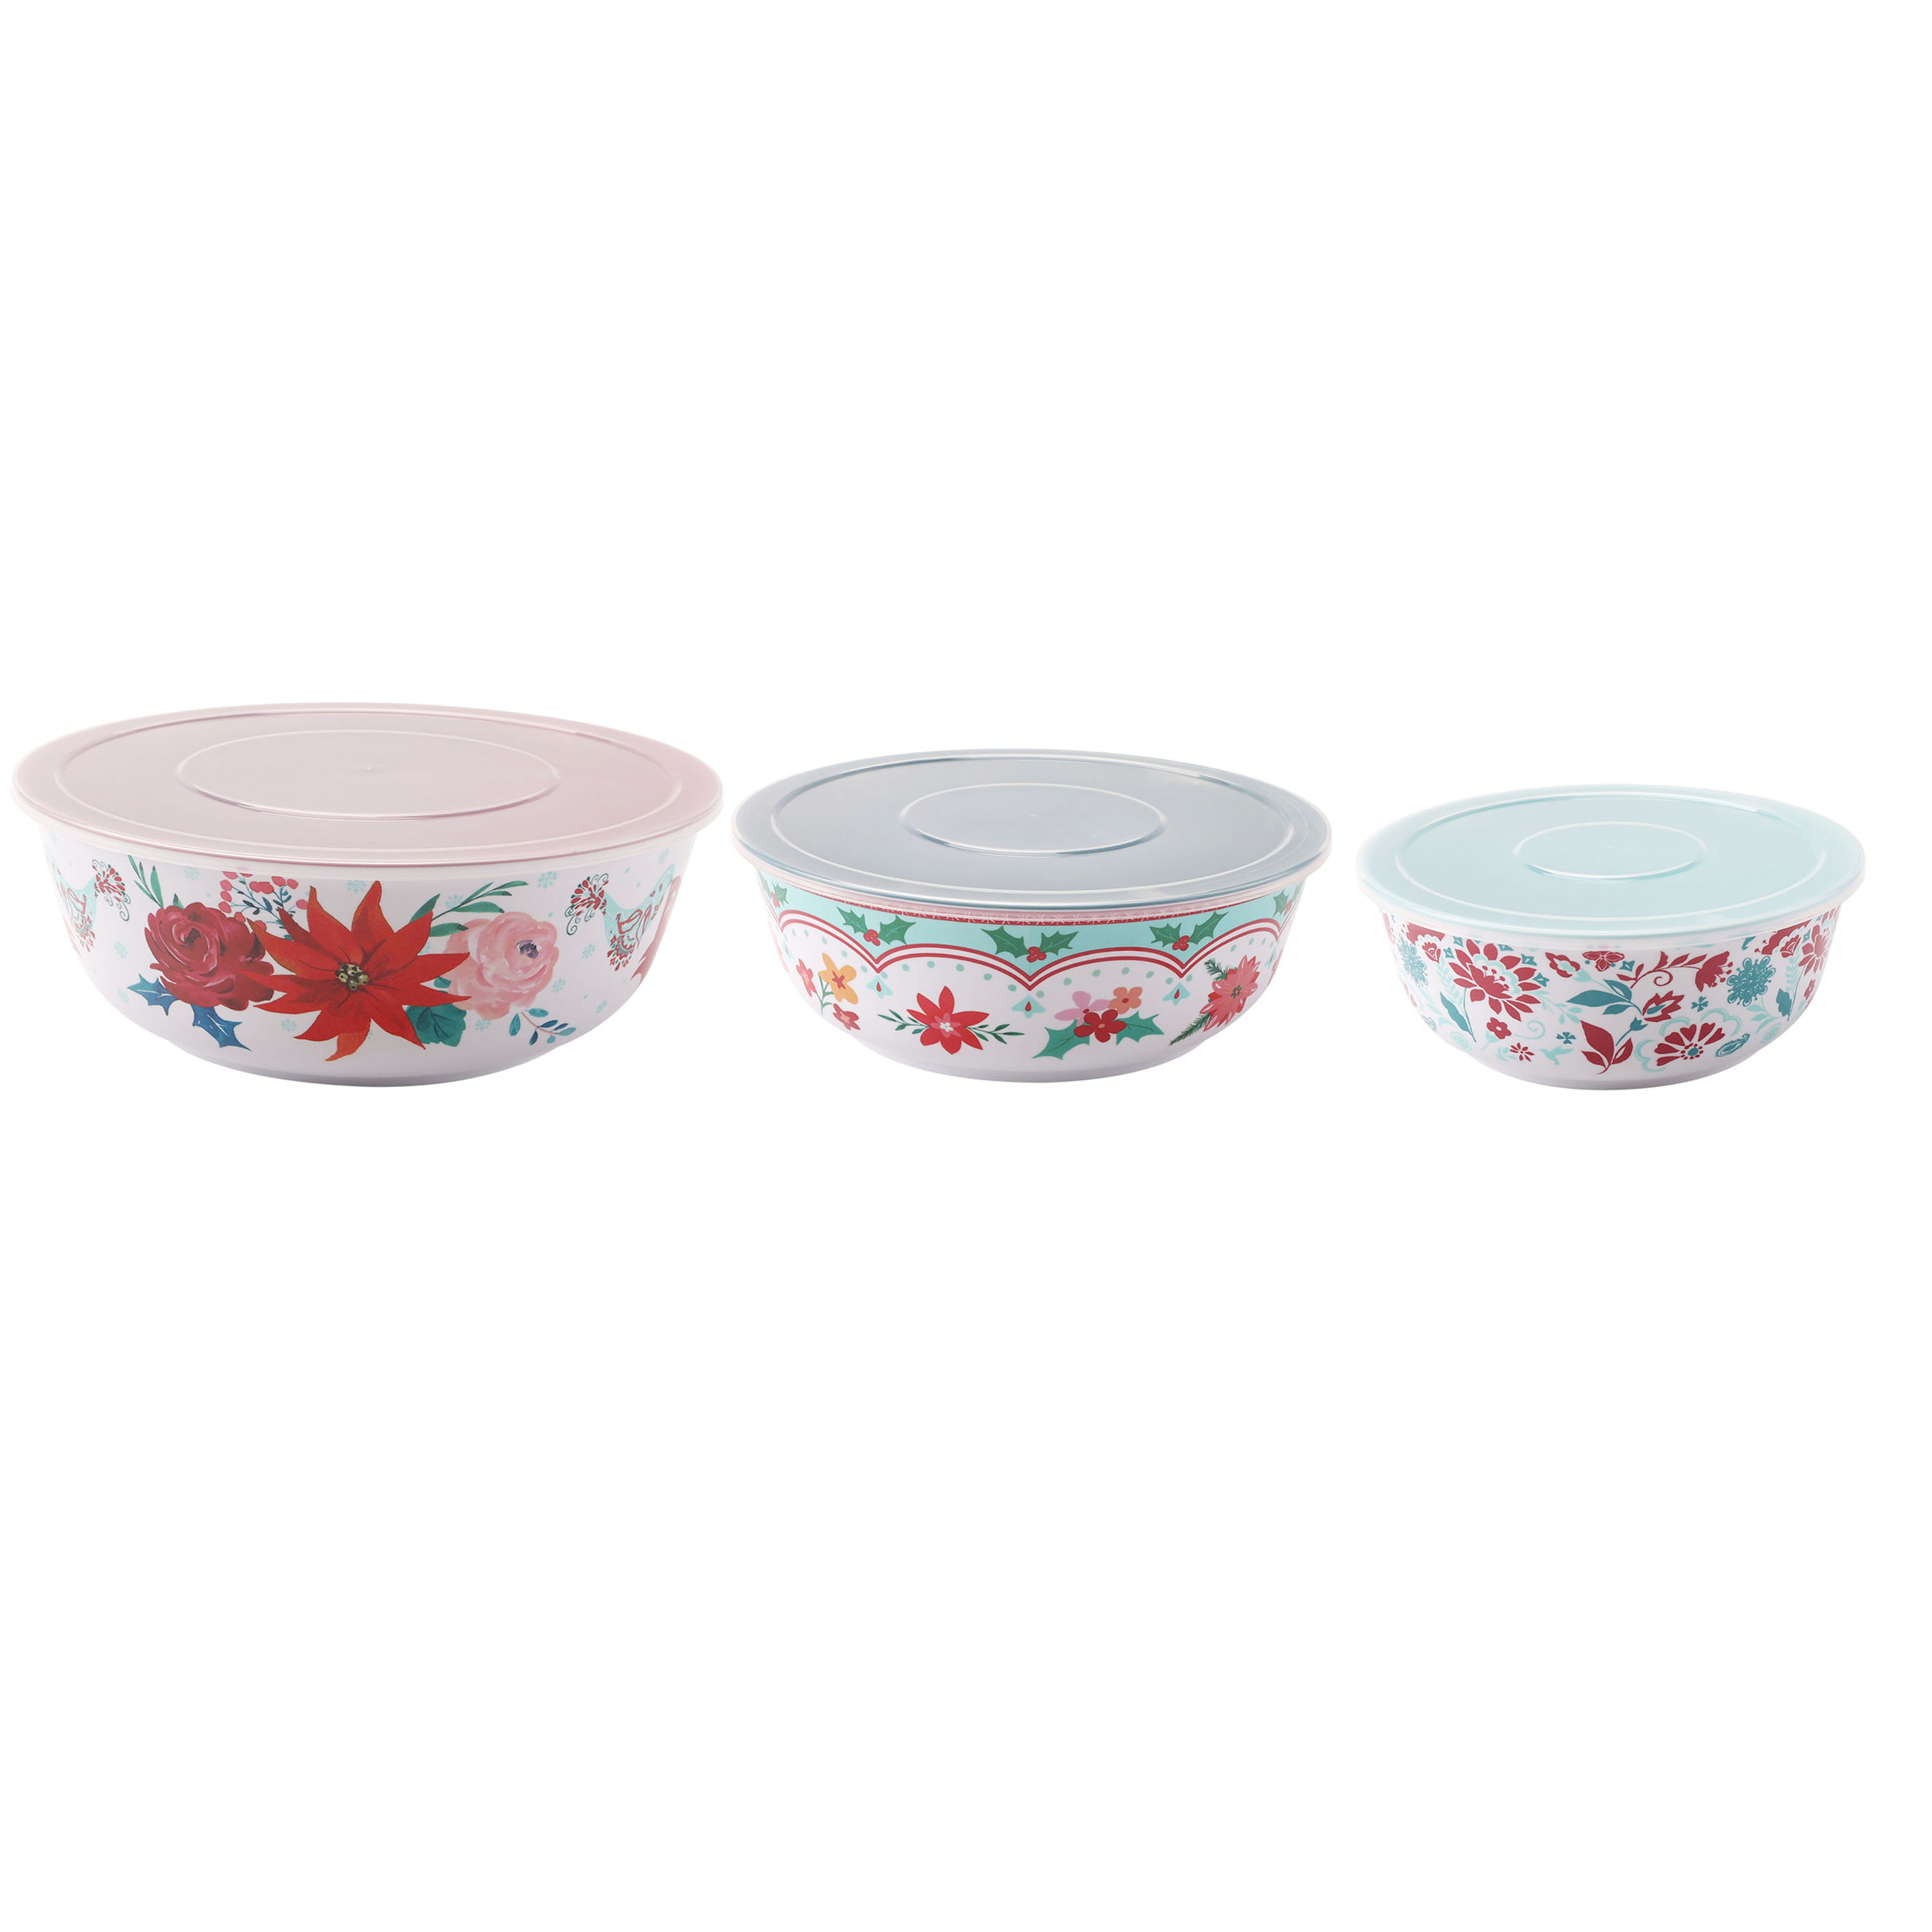  The Pioneer Woman Mazie 6-Piece Round Ceramic Nesting Bowl Set  with Build-In Steam Release,15.5 ounce : Home & Kitchen